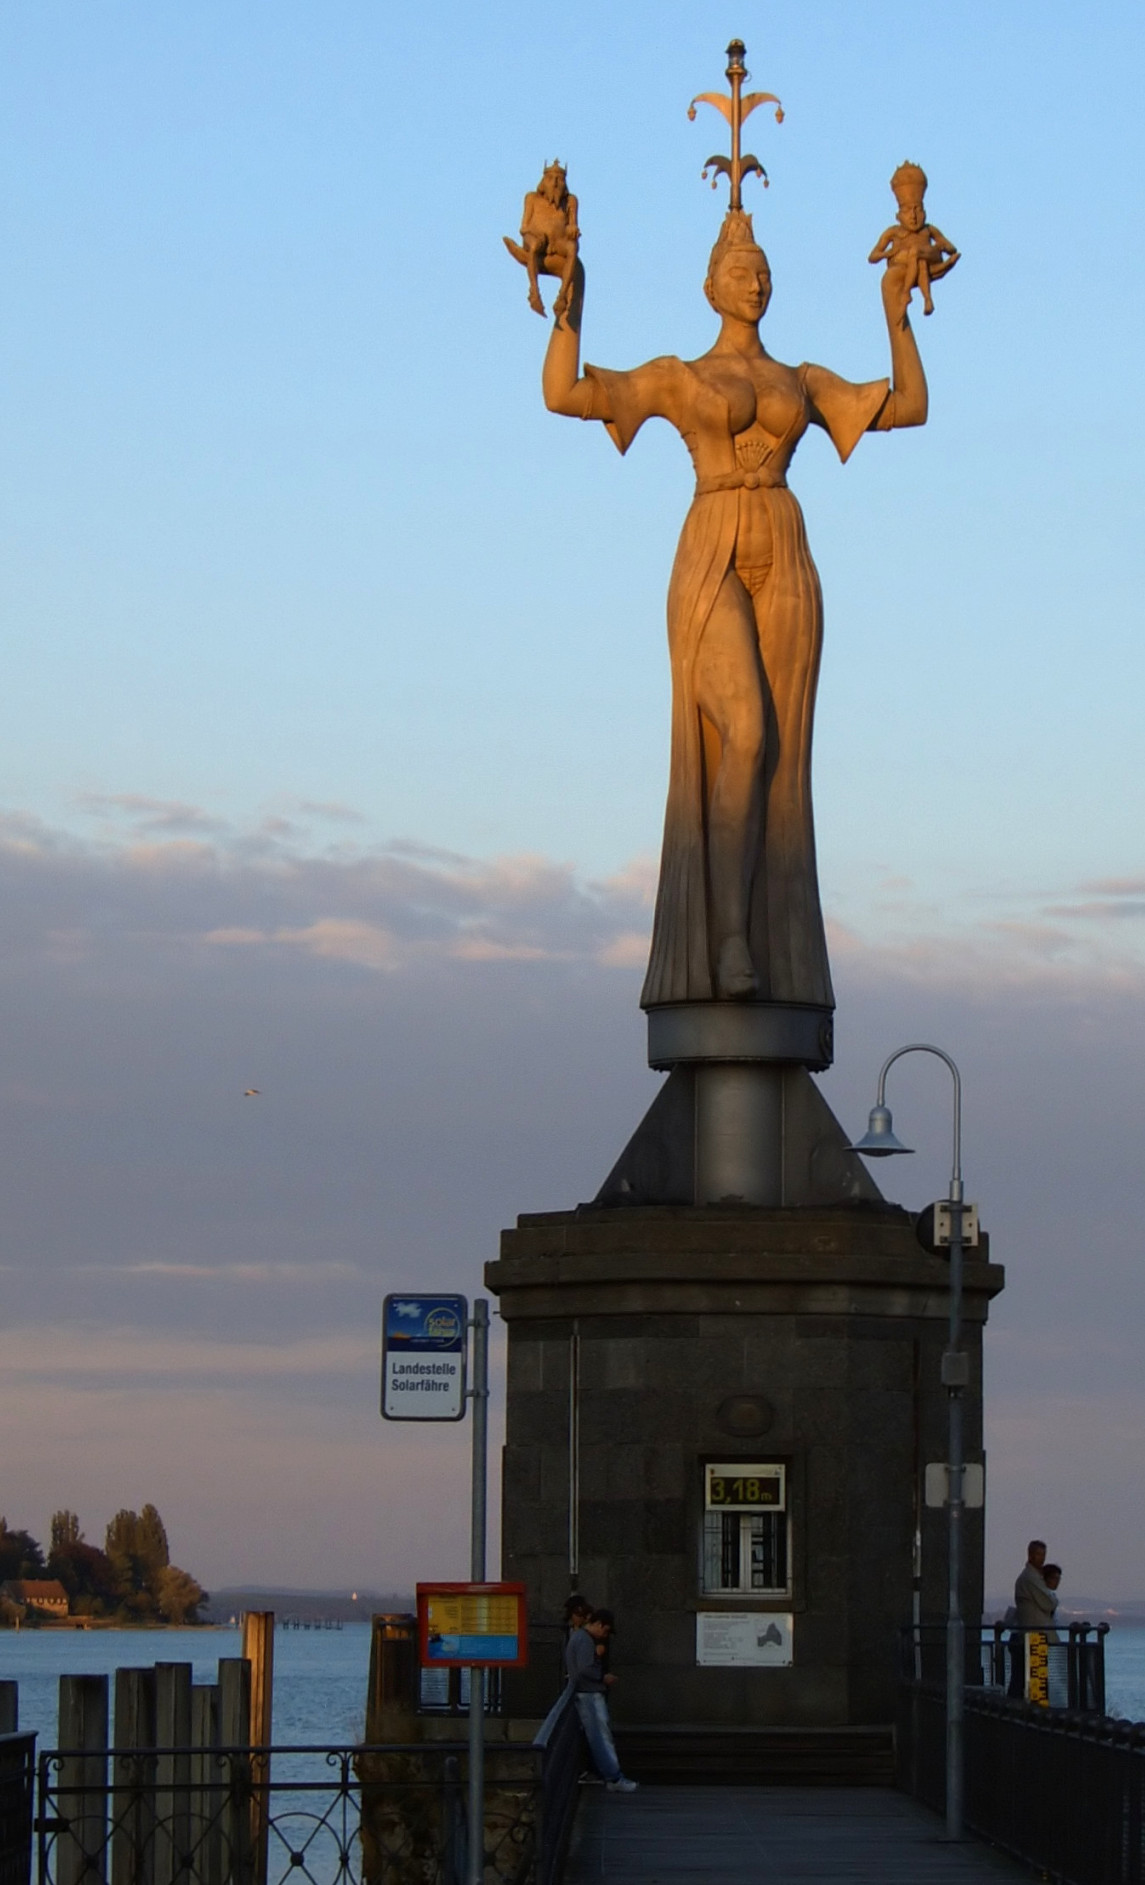 Imperia(Statue) Konstanz Abend -- By Florian Fell (Own work) [Public domain], via Wikimedia Commons